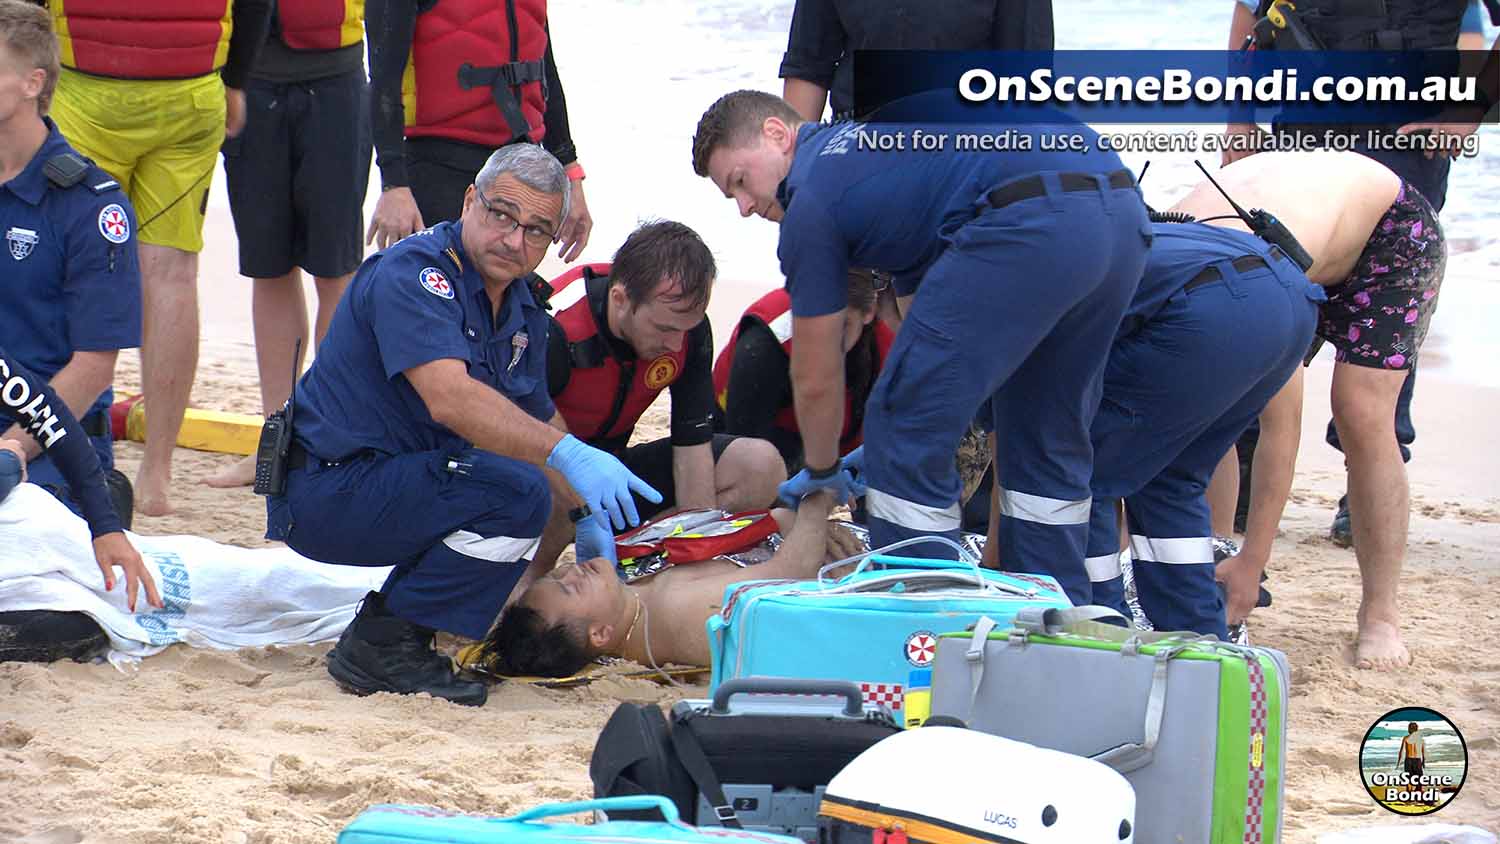 Four rescued from drowning after life savers respond during training session at Bondi Beach